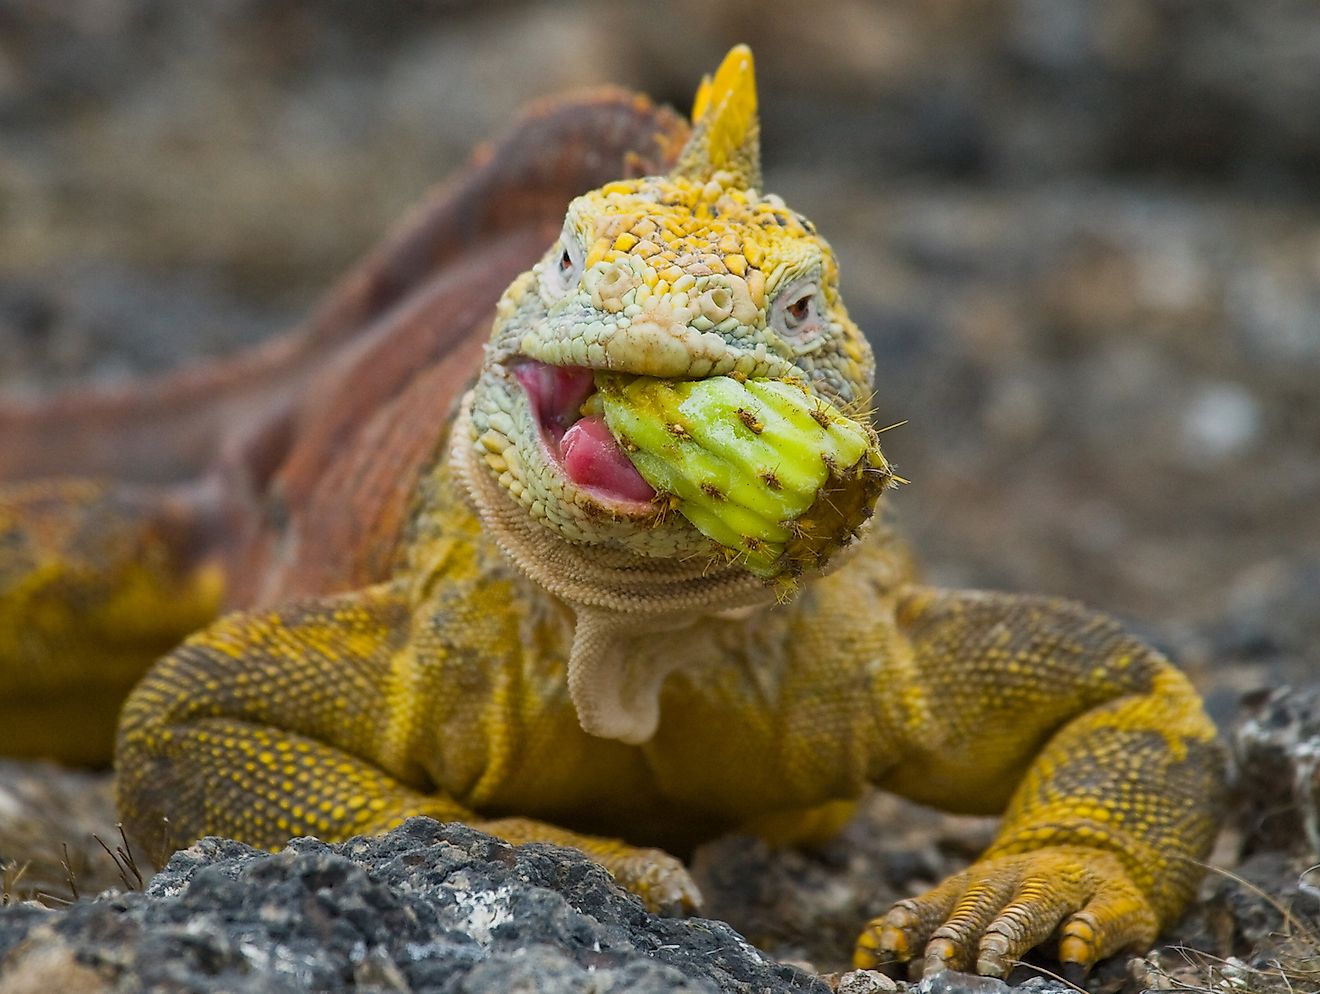 The land iguana eating a prickly pear cactus in Galapagos Islands. Image credit: GUDKOV ANDREY/Shutterstock.com